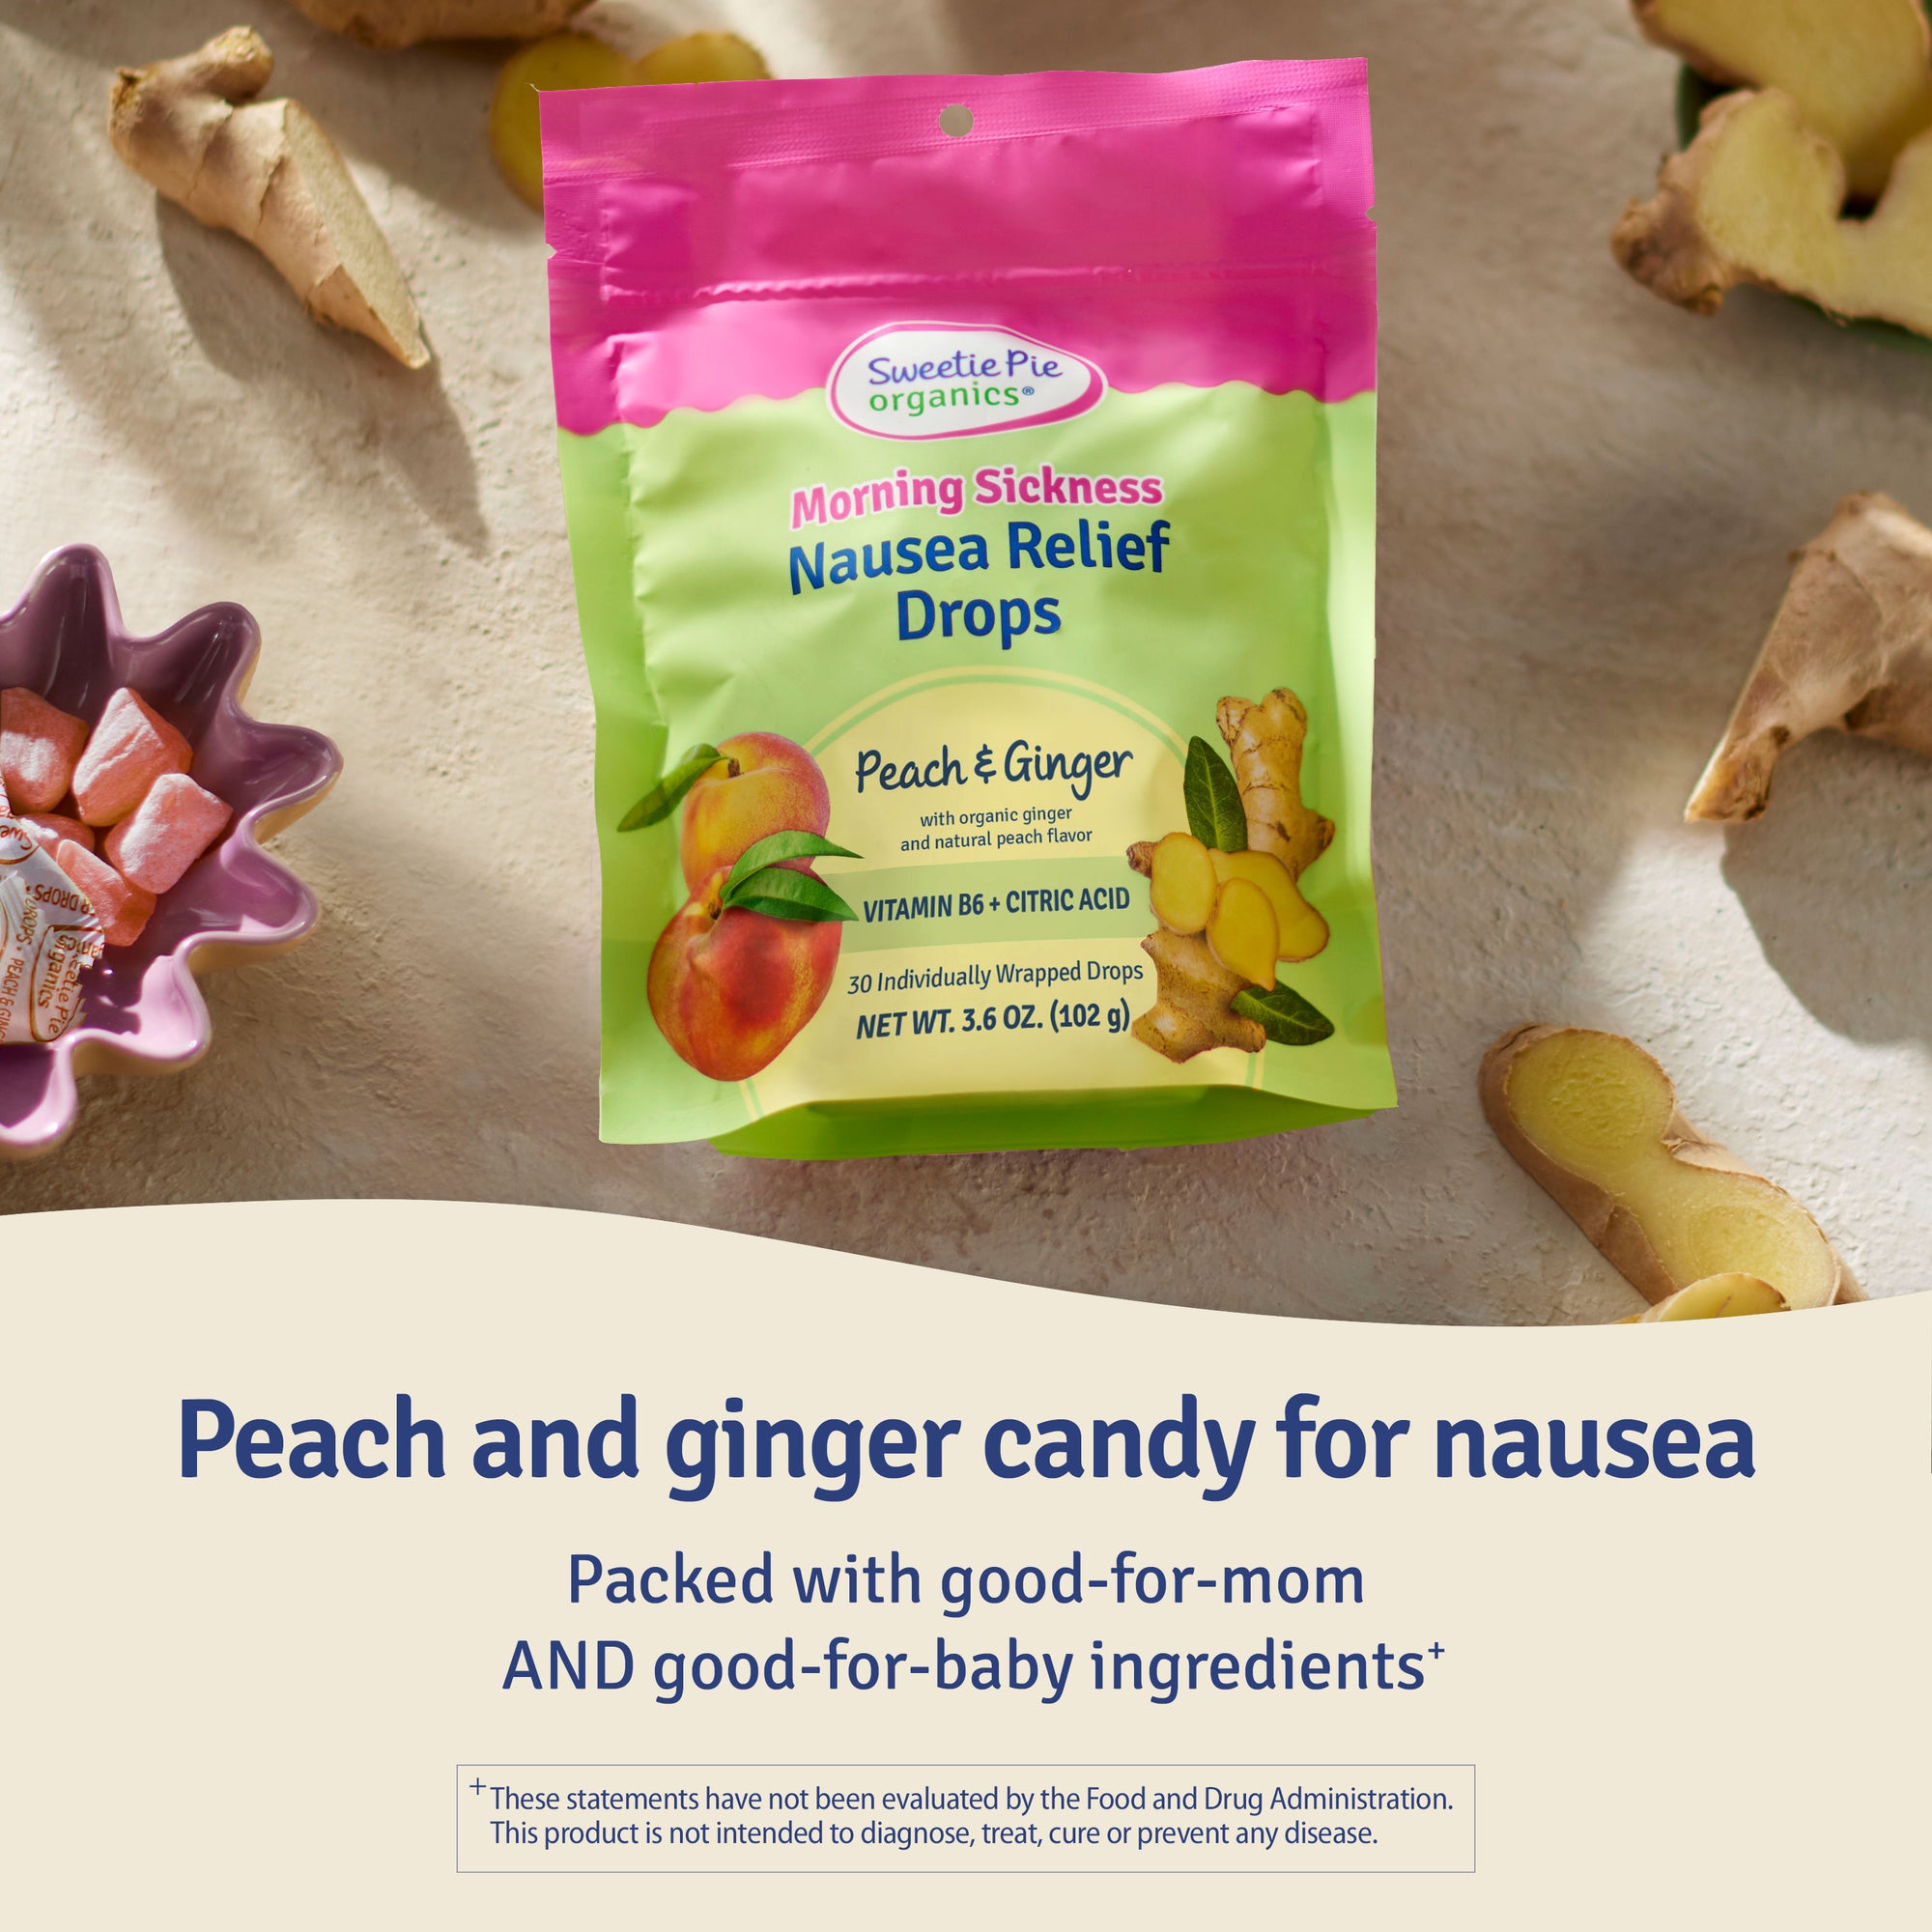 Peach and ginger candy for nausea - Picture of a bag of Sweetie Pie Morning Sickness Nausea Relief Drops